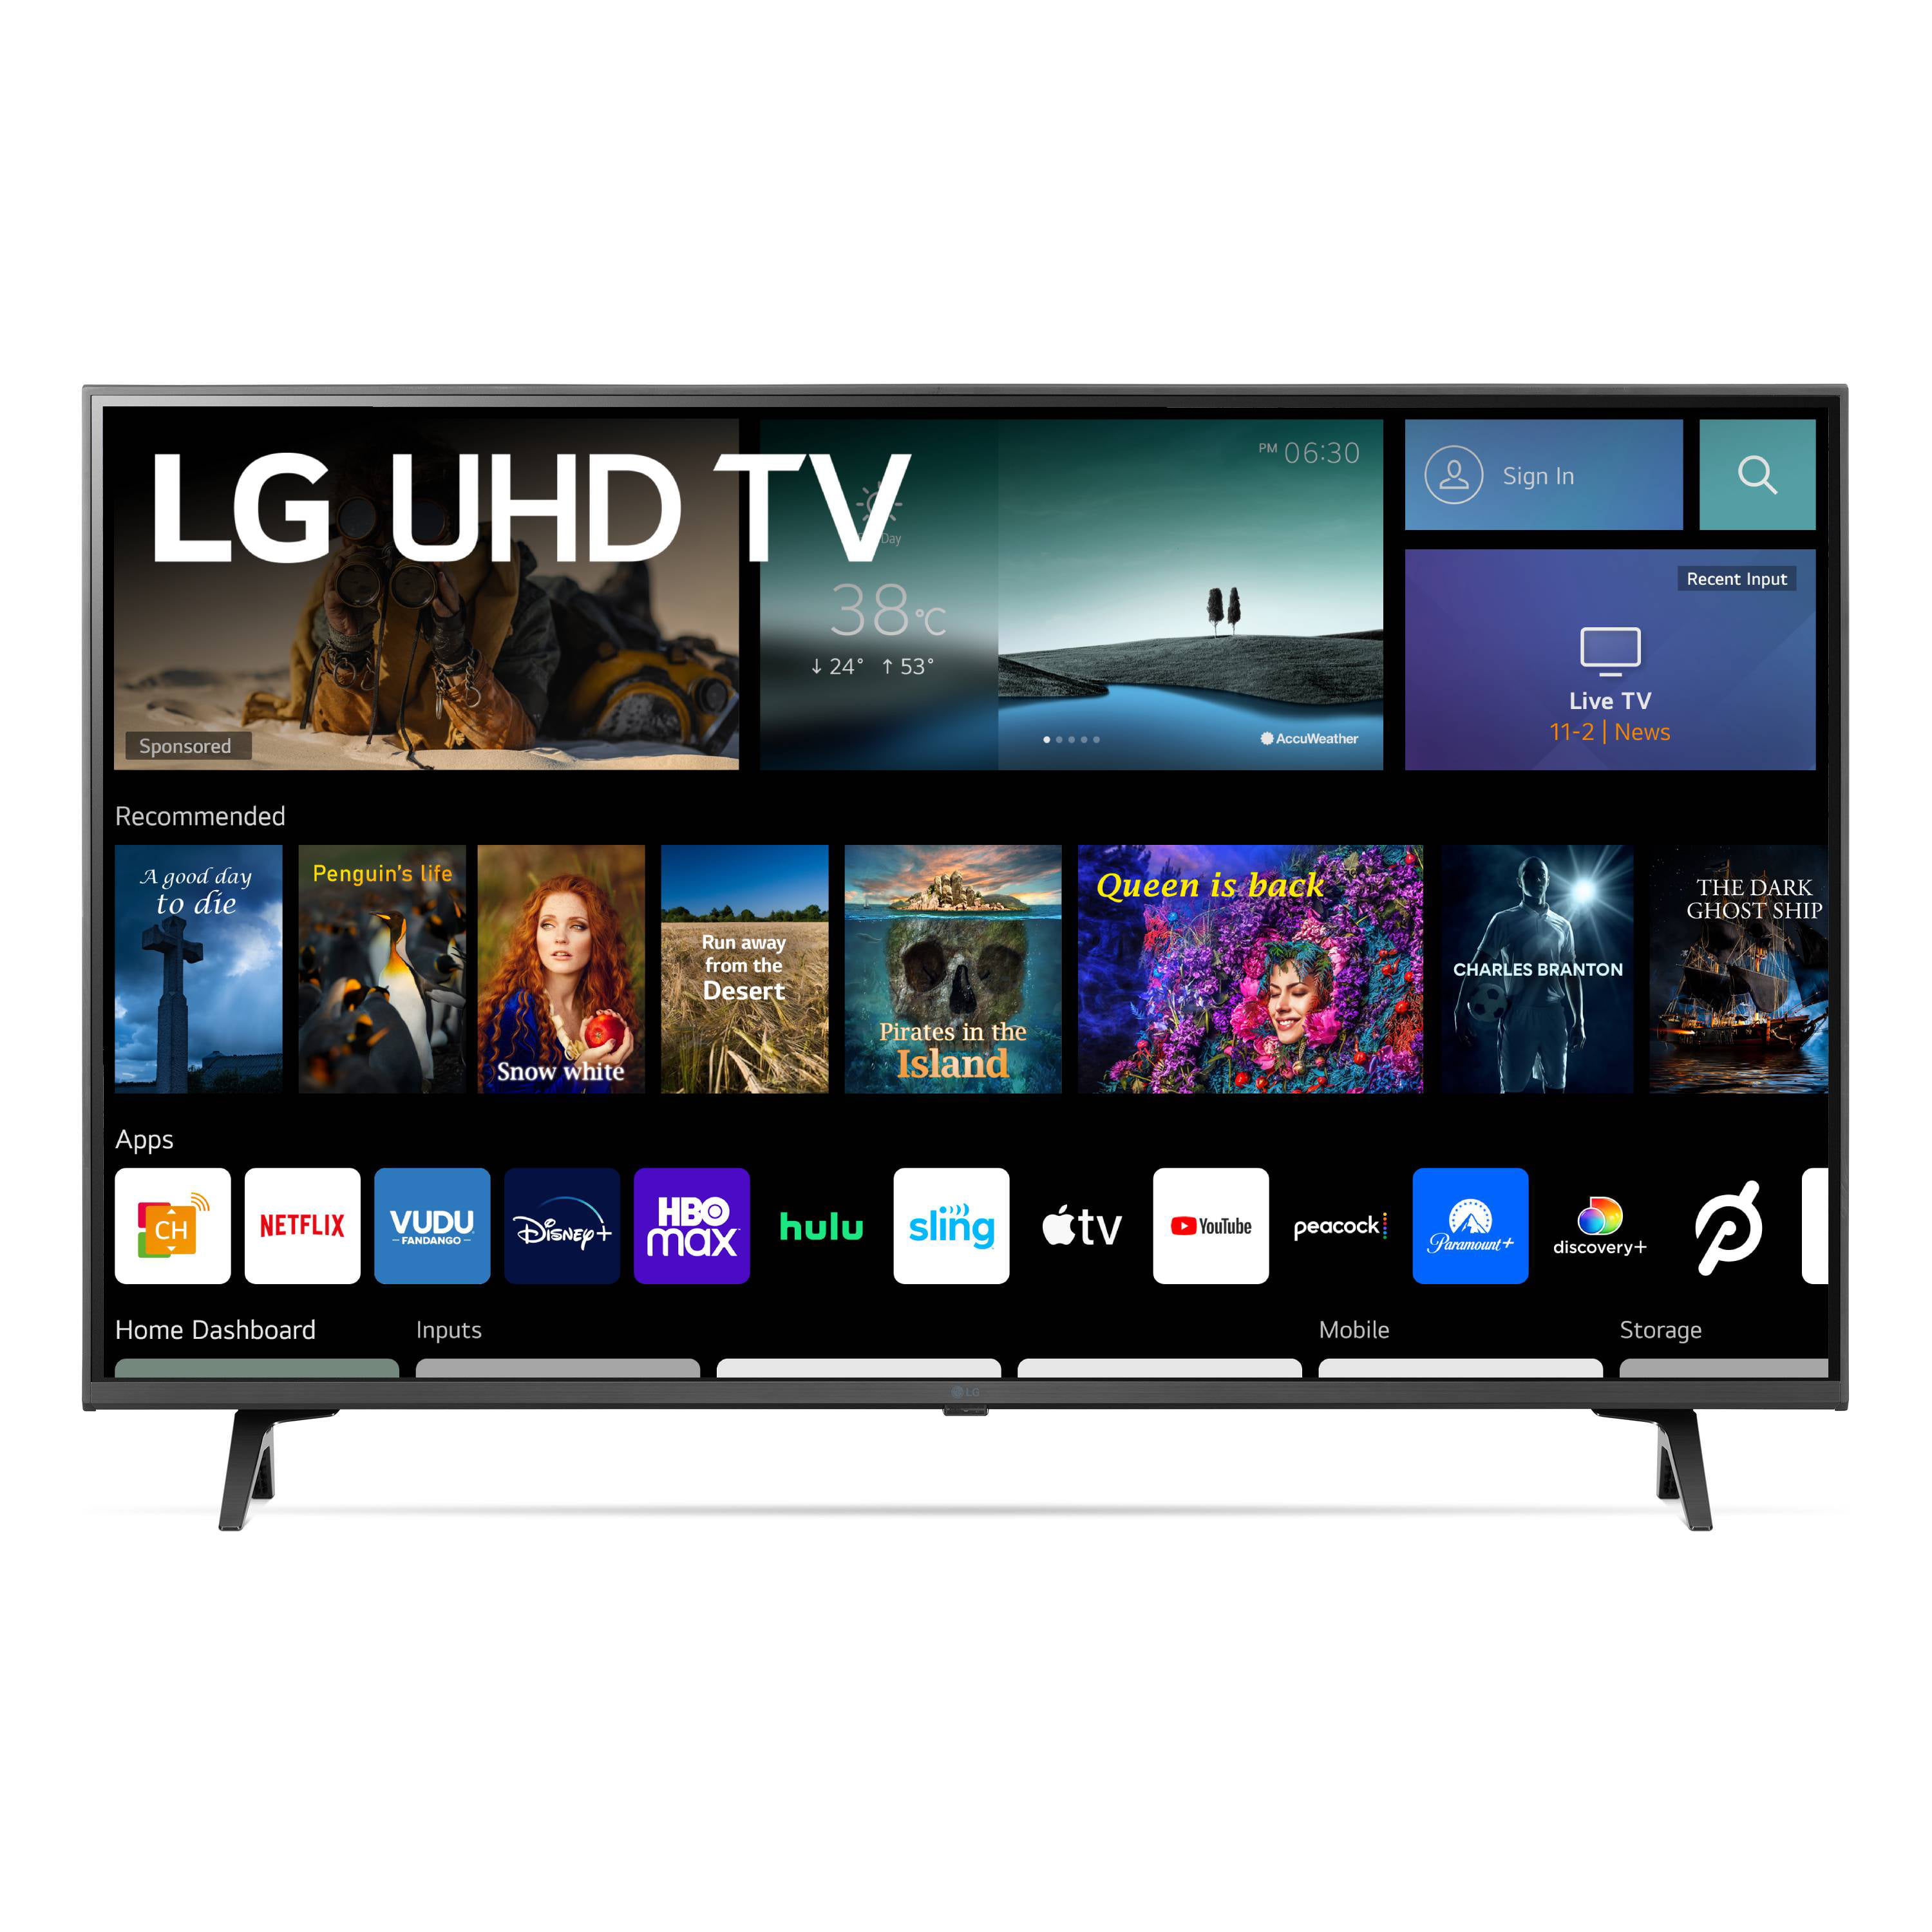 How to Set Up Your LG TV? 7